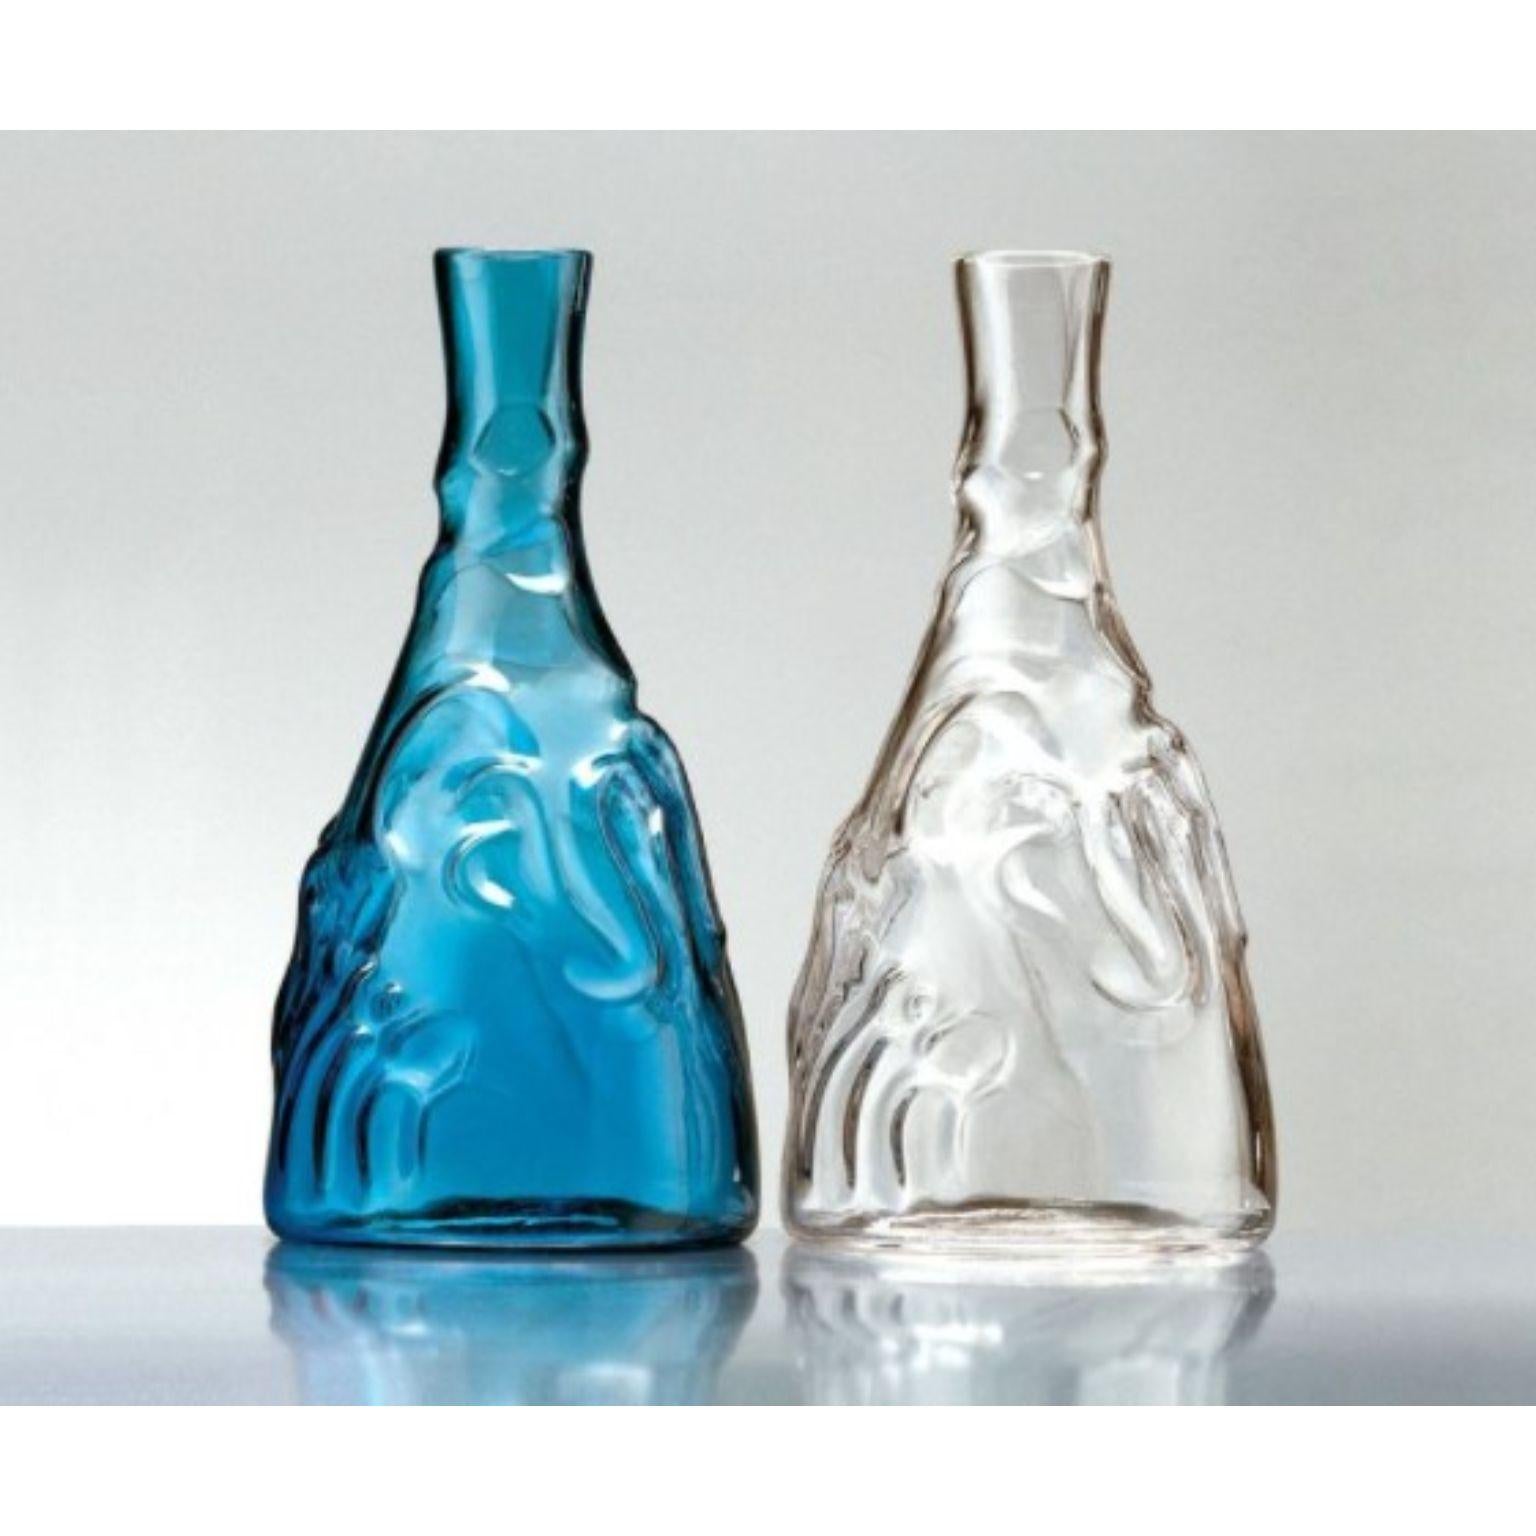 Set of Casa de Familia bottles by Josep Maria Jujol
Dimensions: Diameter 13 x Height 27 cm 
Materials: Glass. 


He designed the Casa de Familia Bottle in 1912, and more than a century later it’s still going strong. The architect Josep Maria